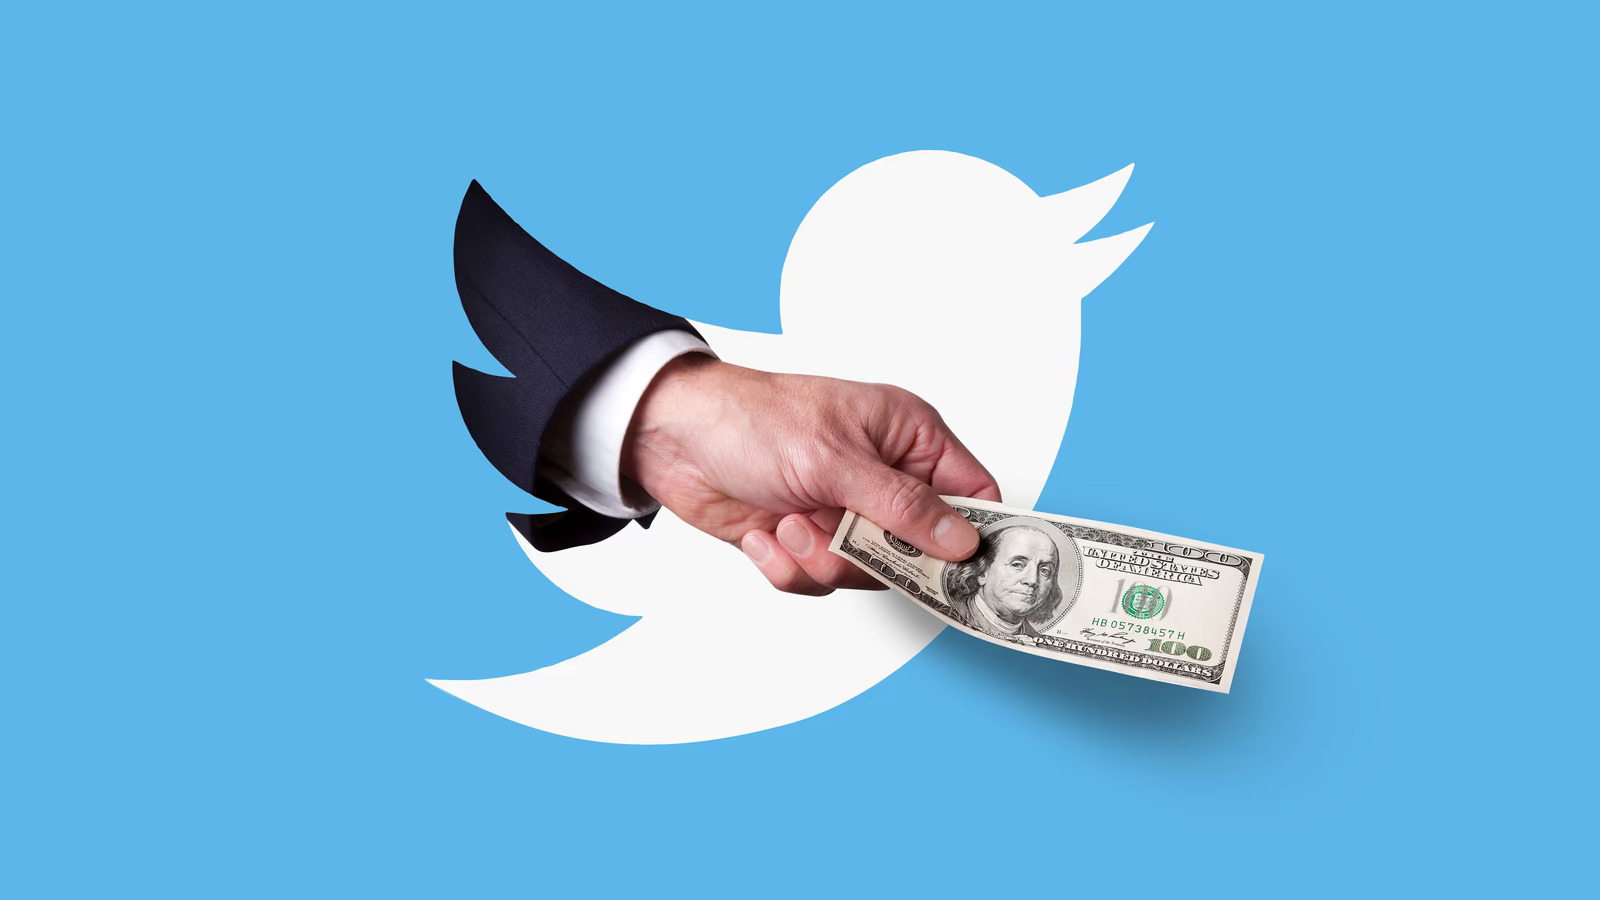 Twitter unveils game-changing revenue sharing model for verified content creators